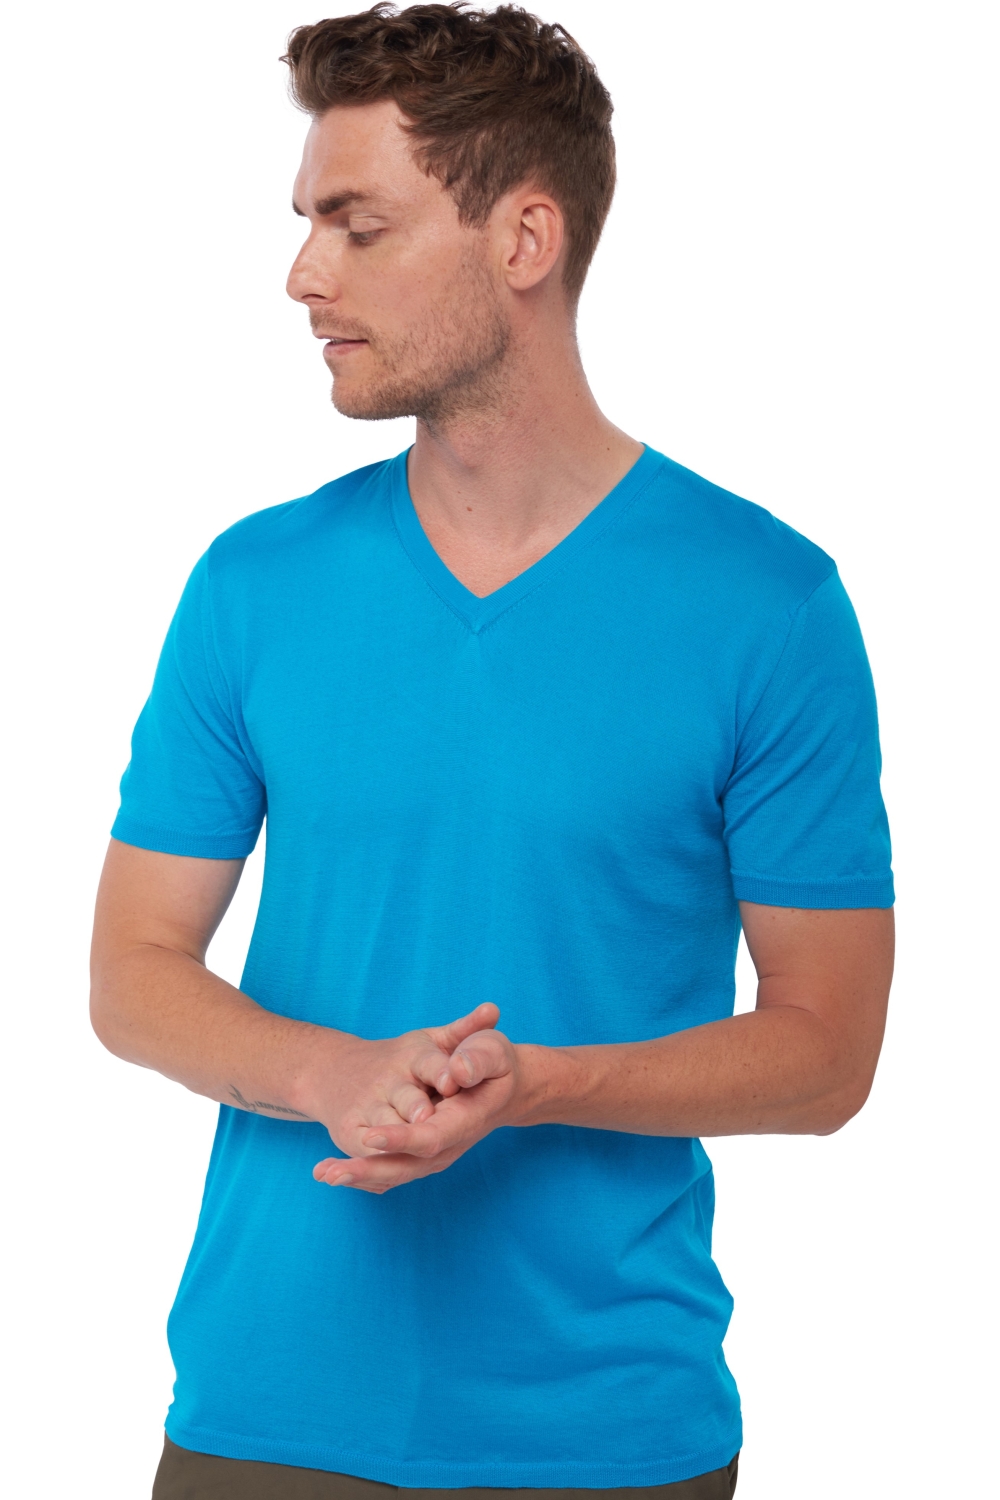 Coton Giza 45 pull homme col v michael turquoise xs